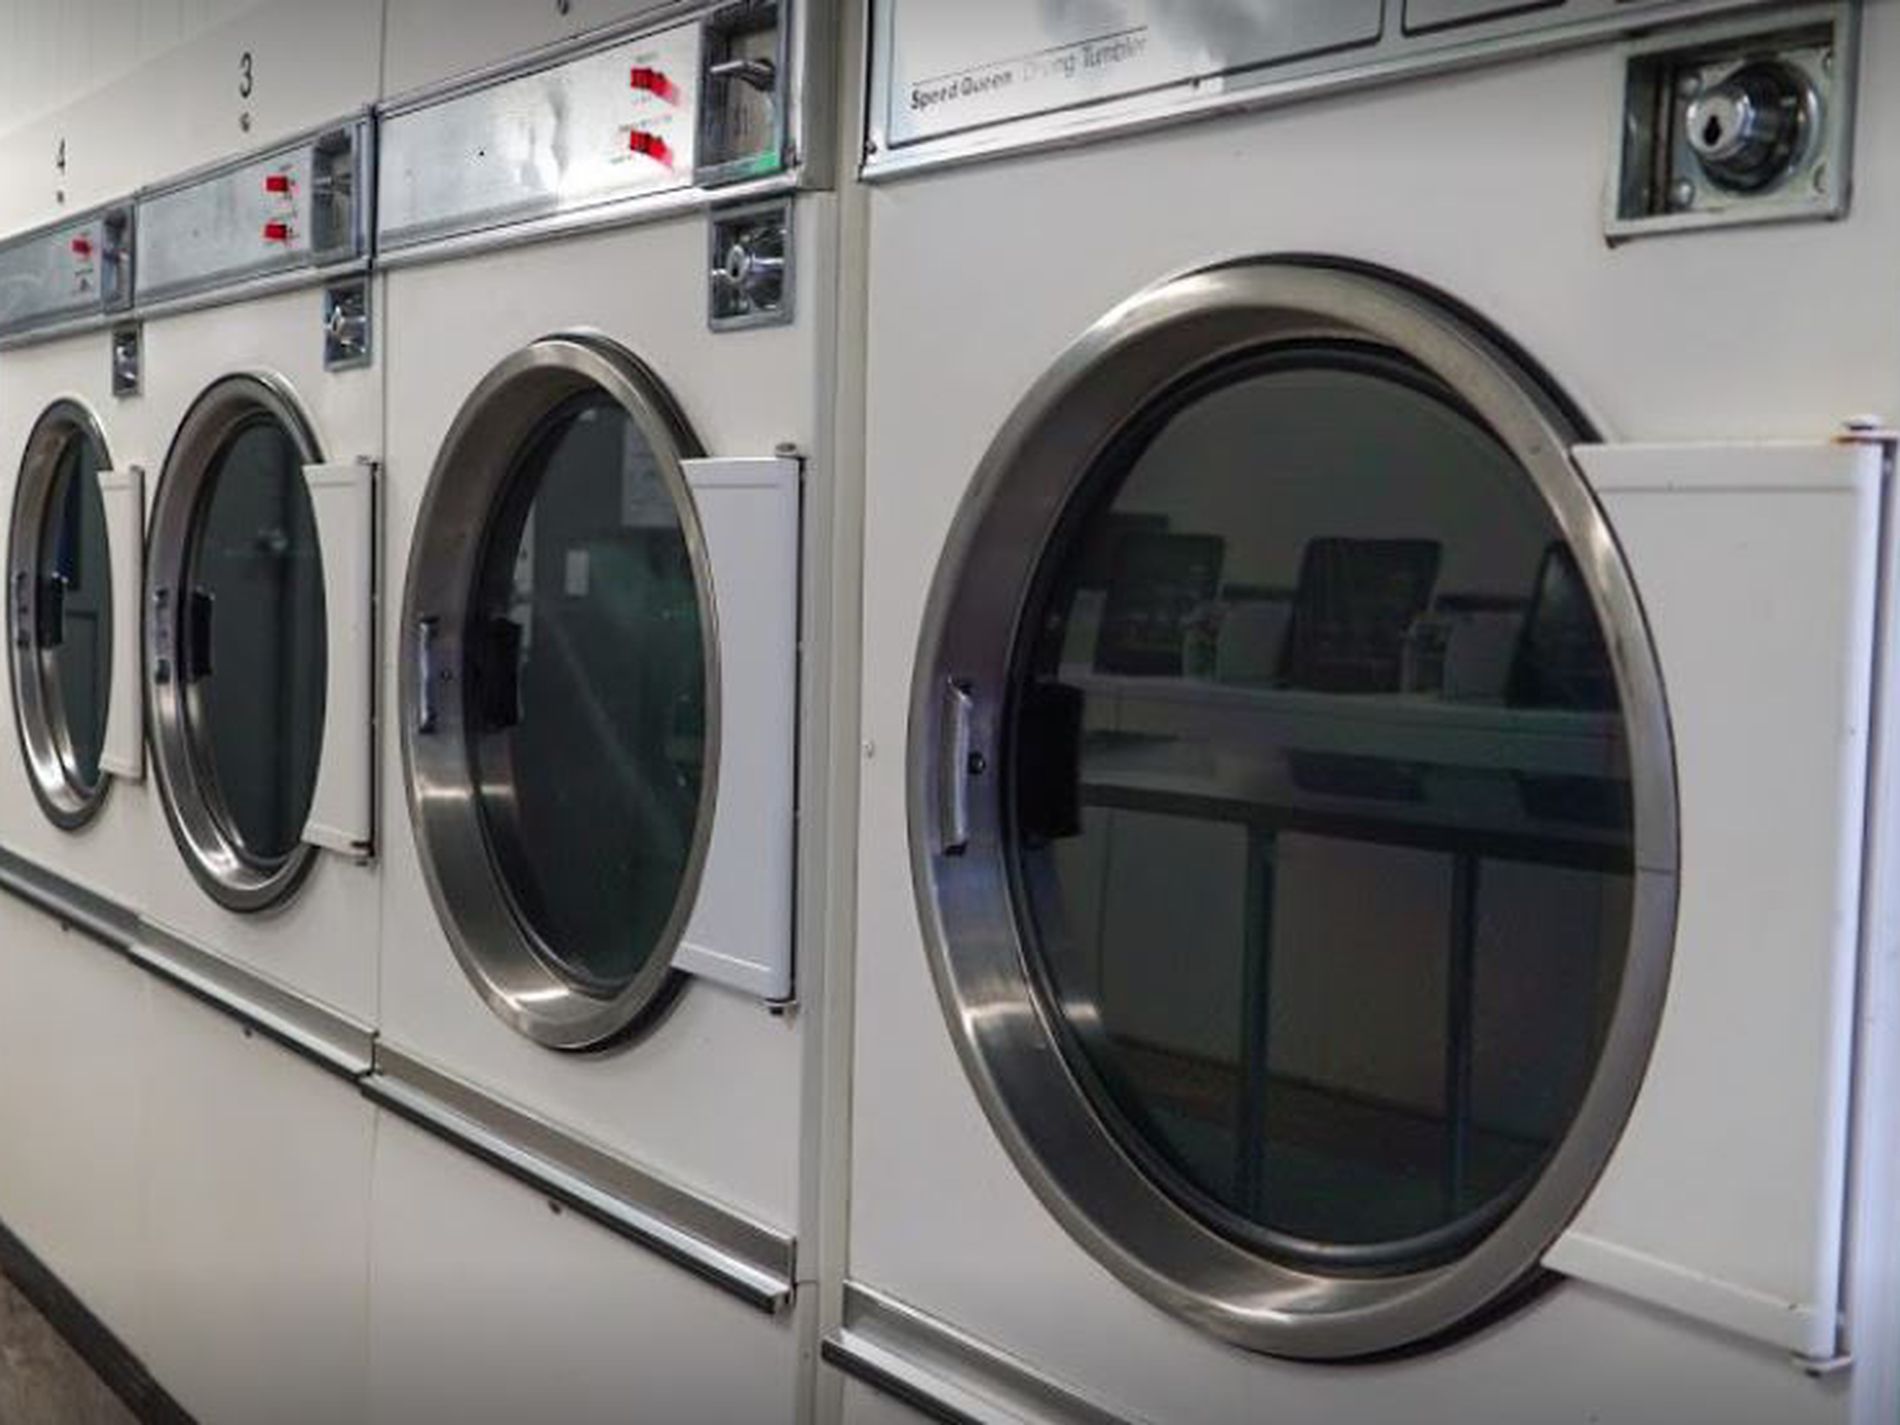 UNDER CONTRACT - Coin Laundry for Sale